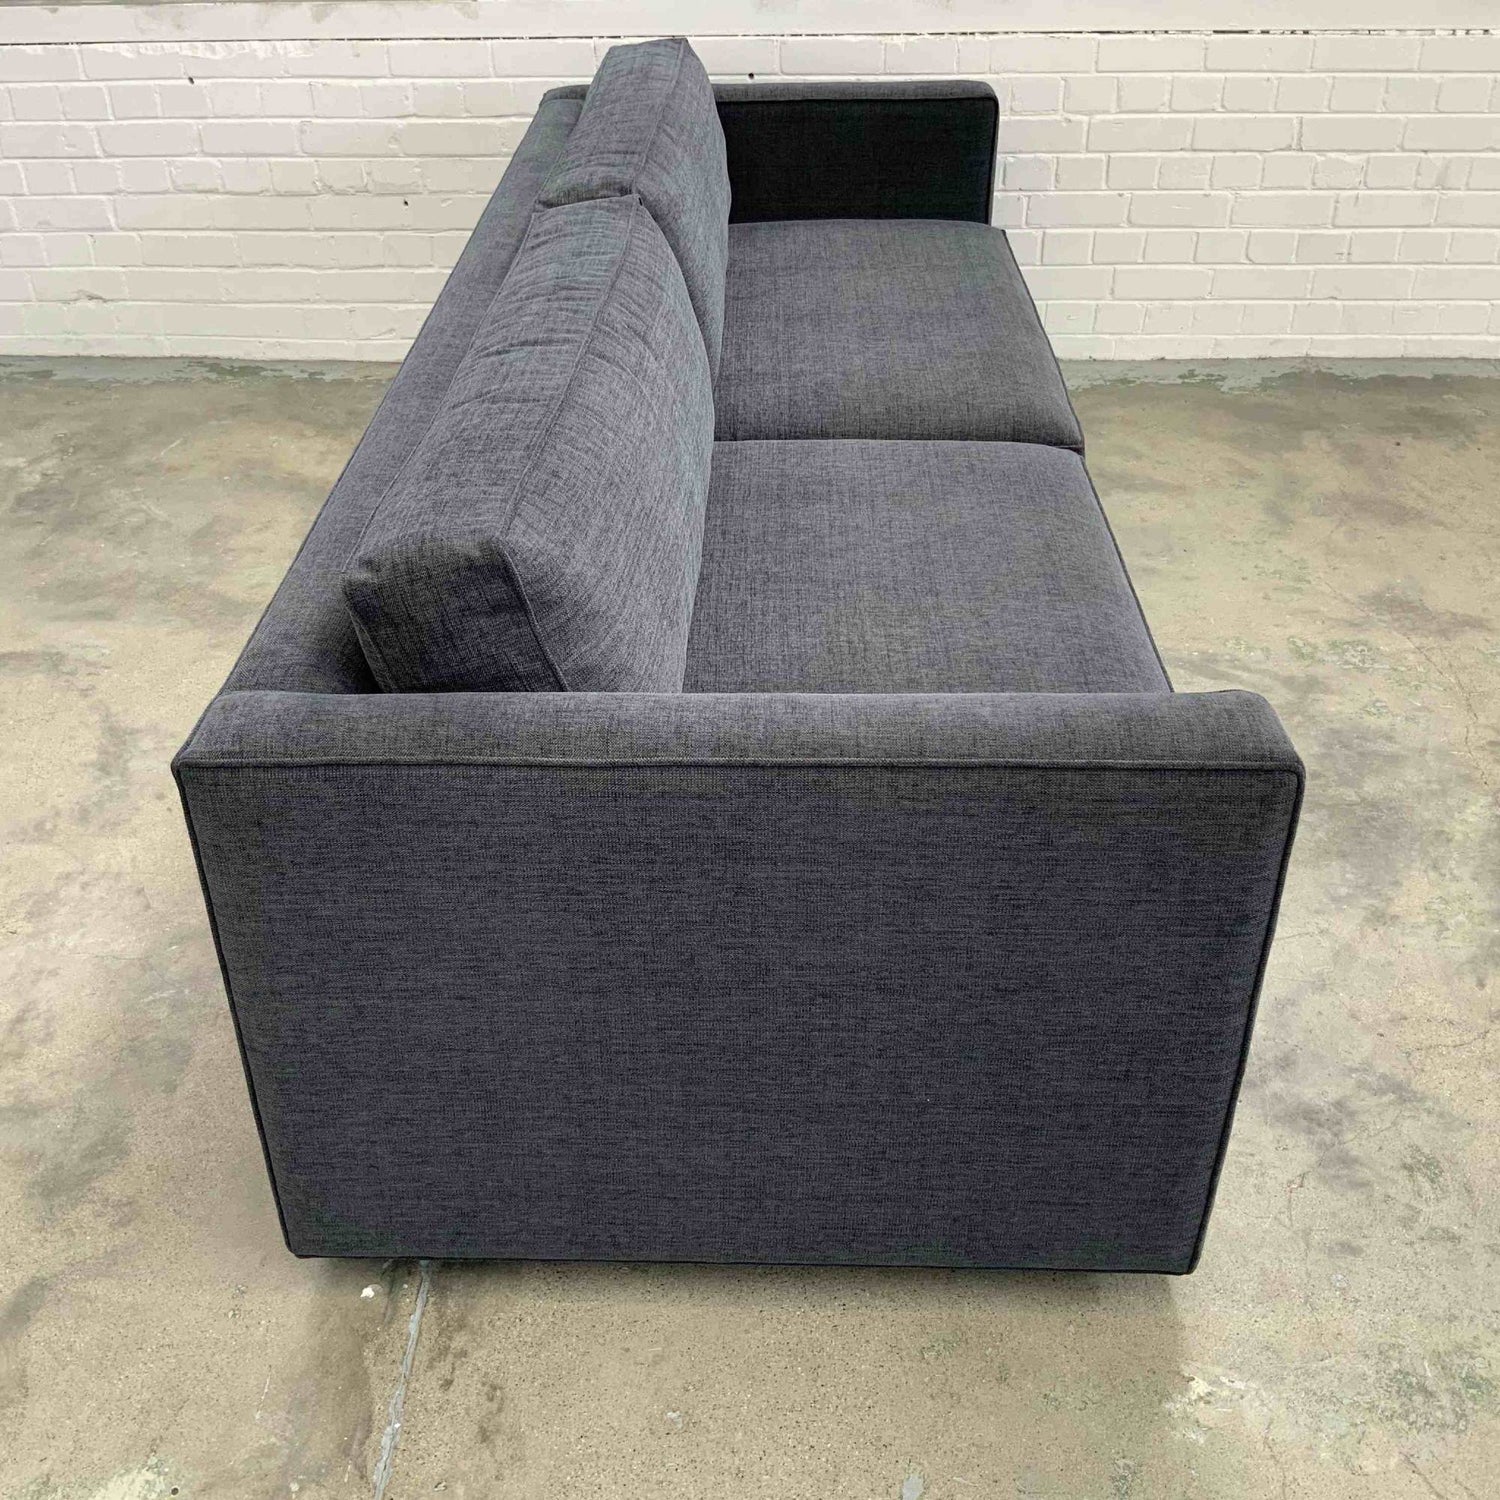 Newport Sofa | Premium Range Fabrics Multiple Sizes And Options Available Made To Order In Wa